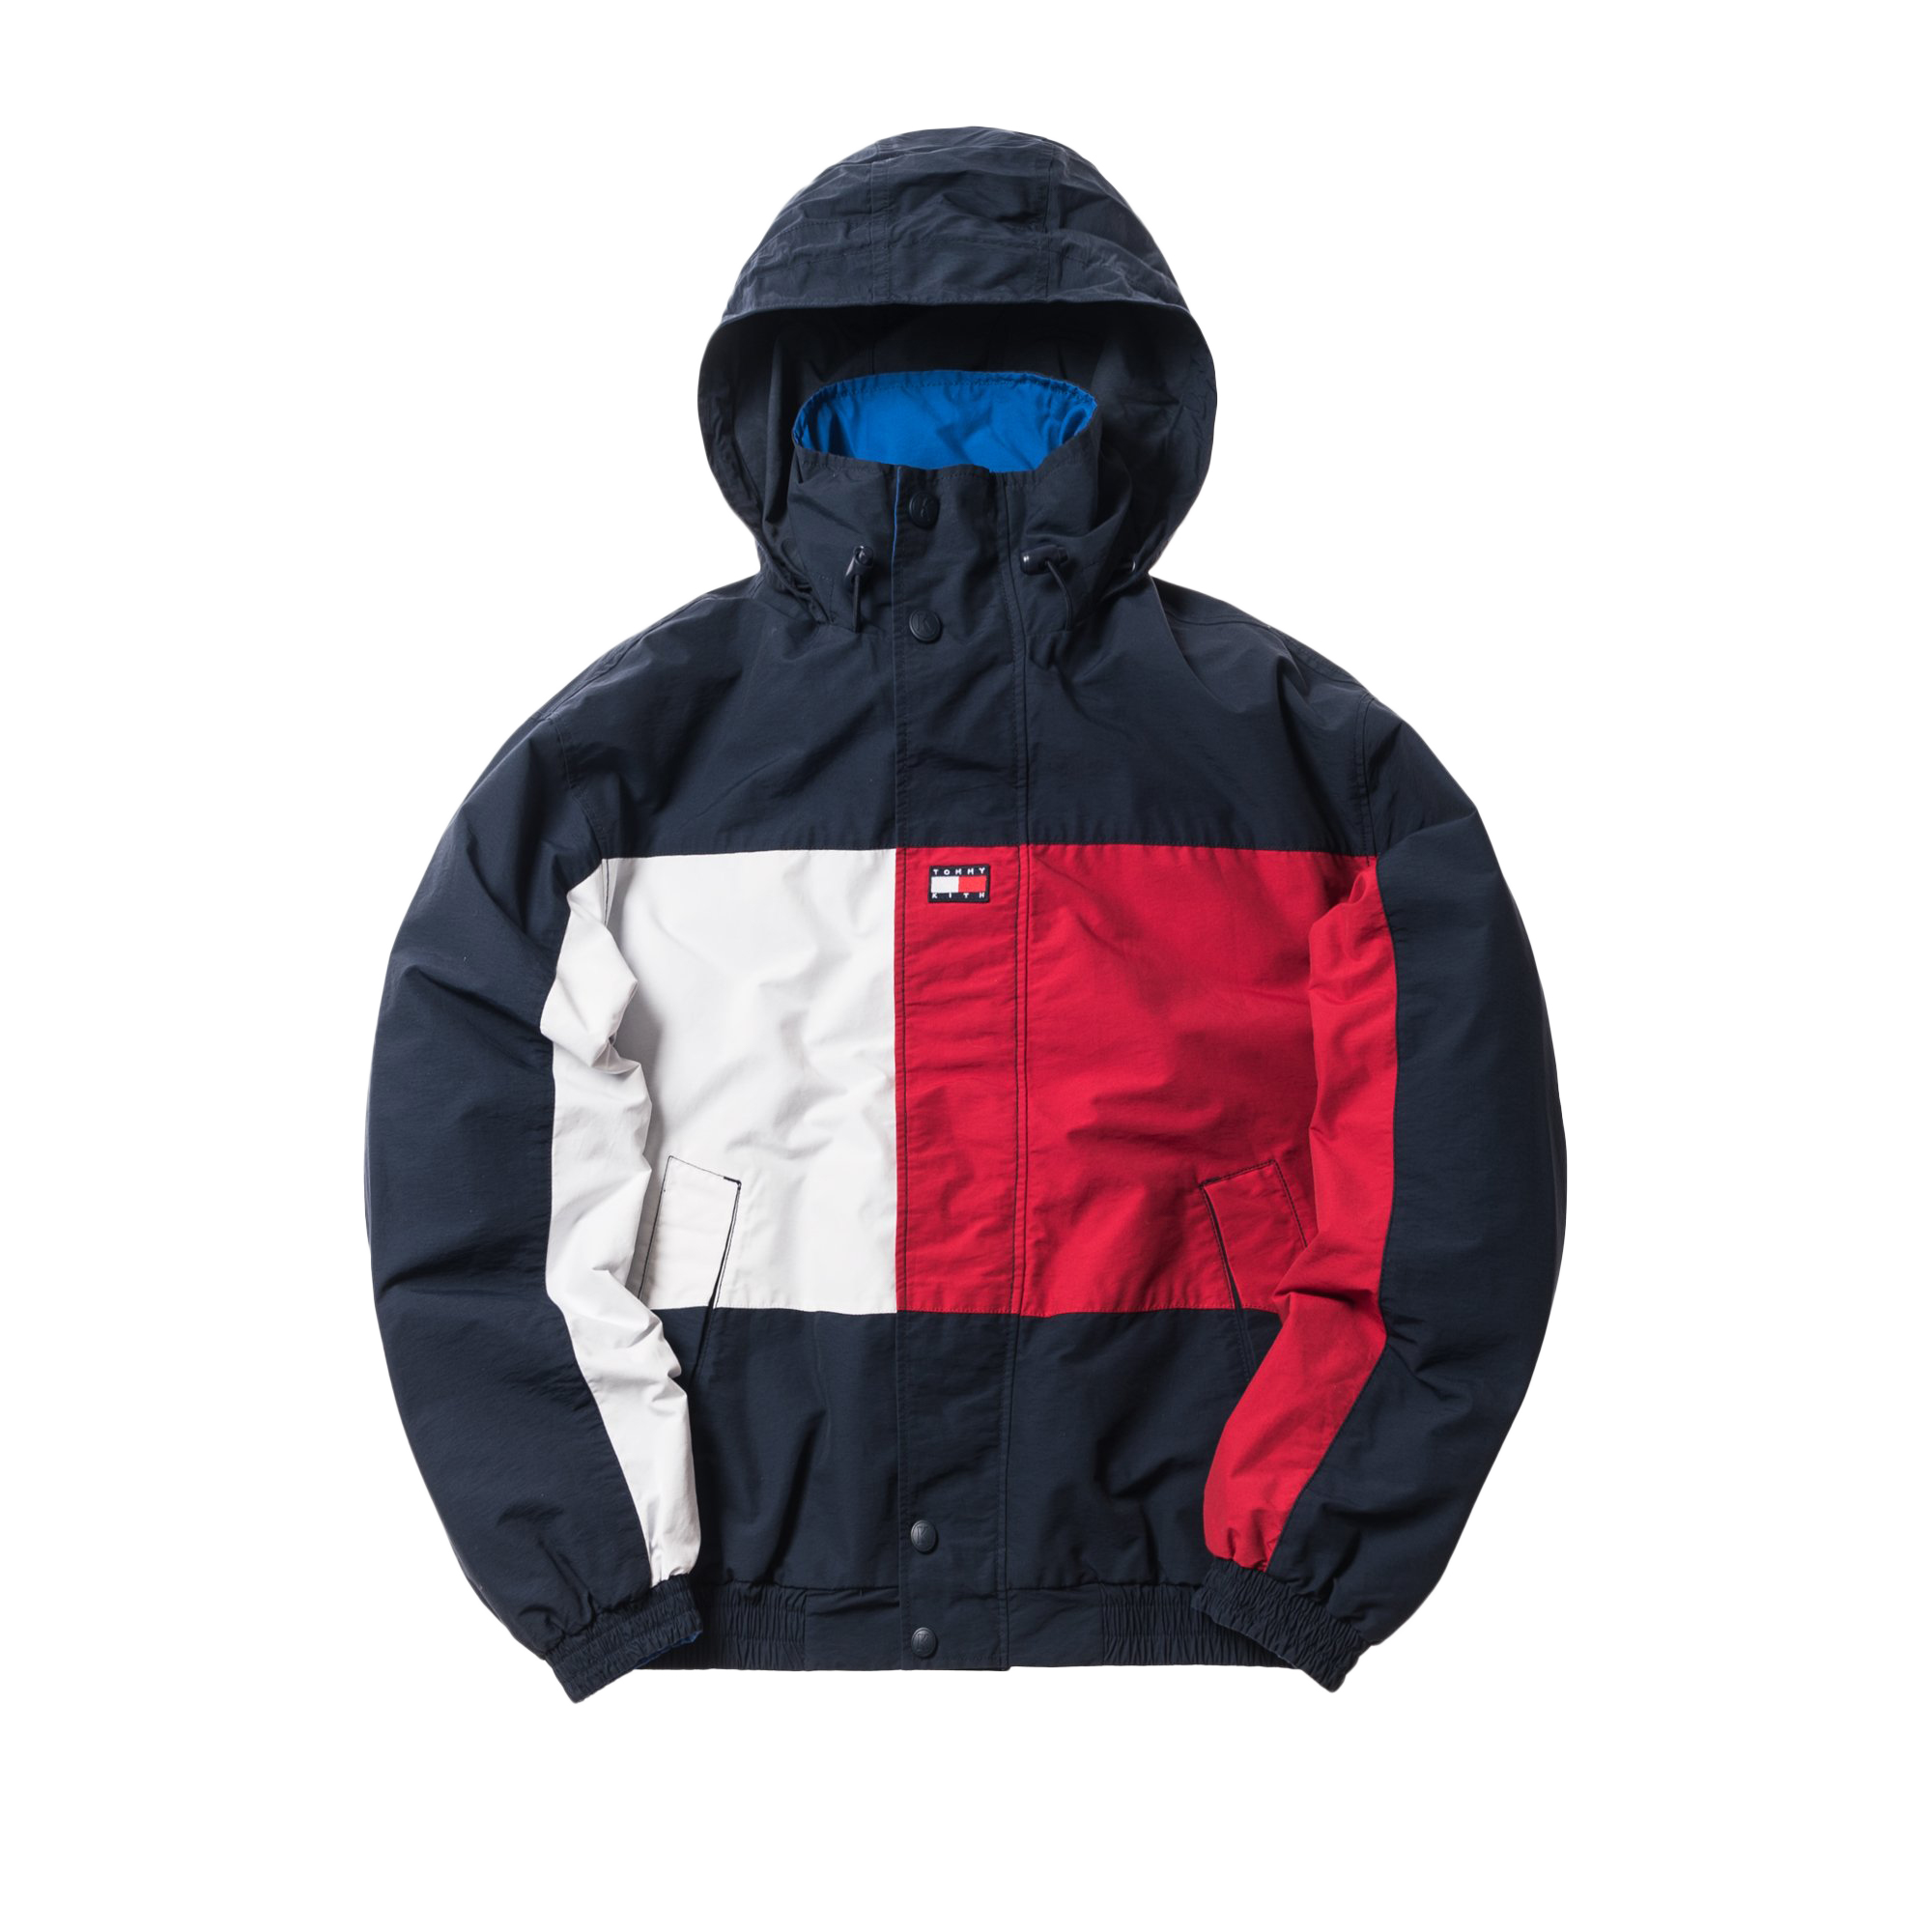 Kith x Tommy Hilfiger Reversible 